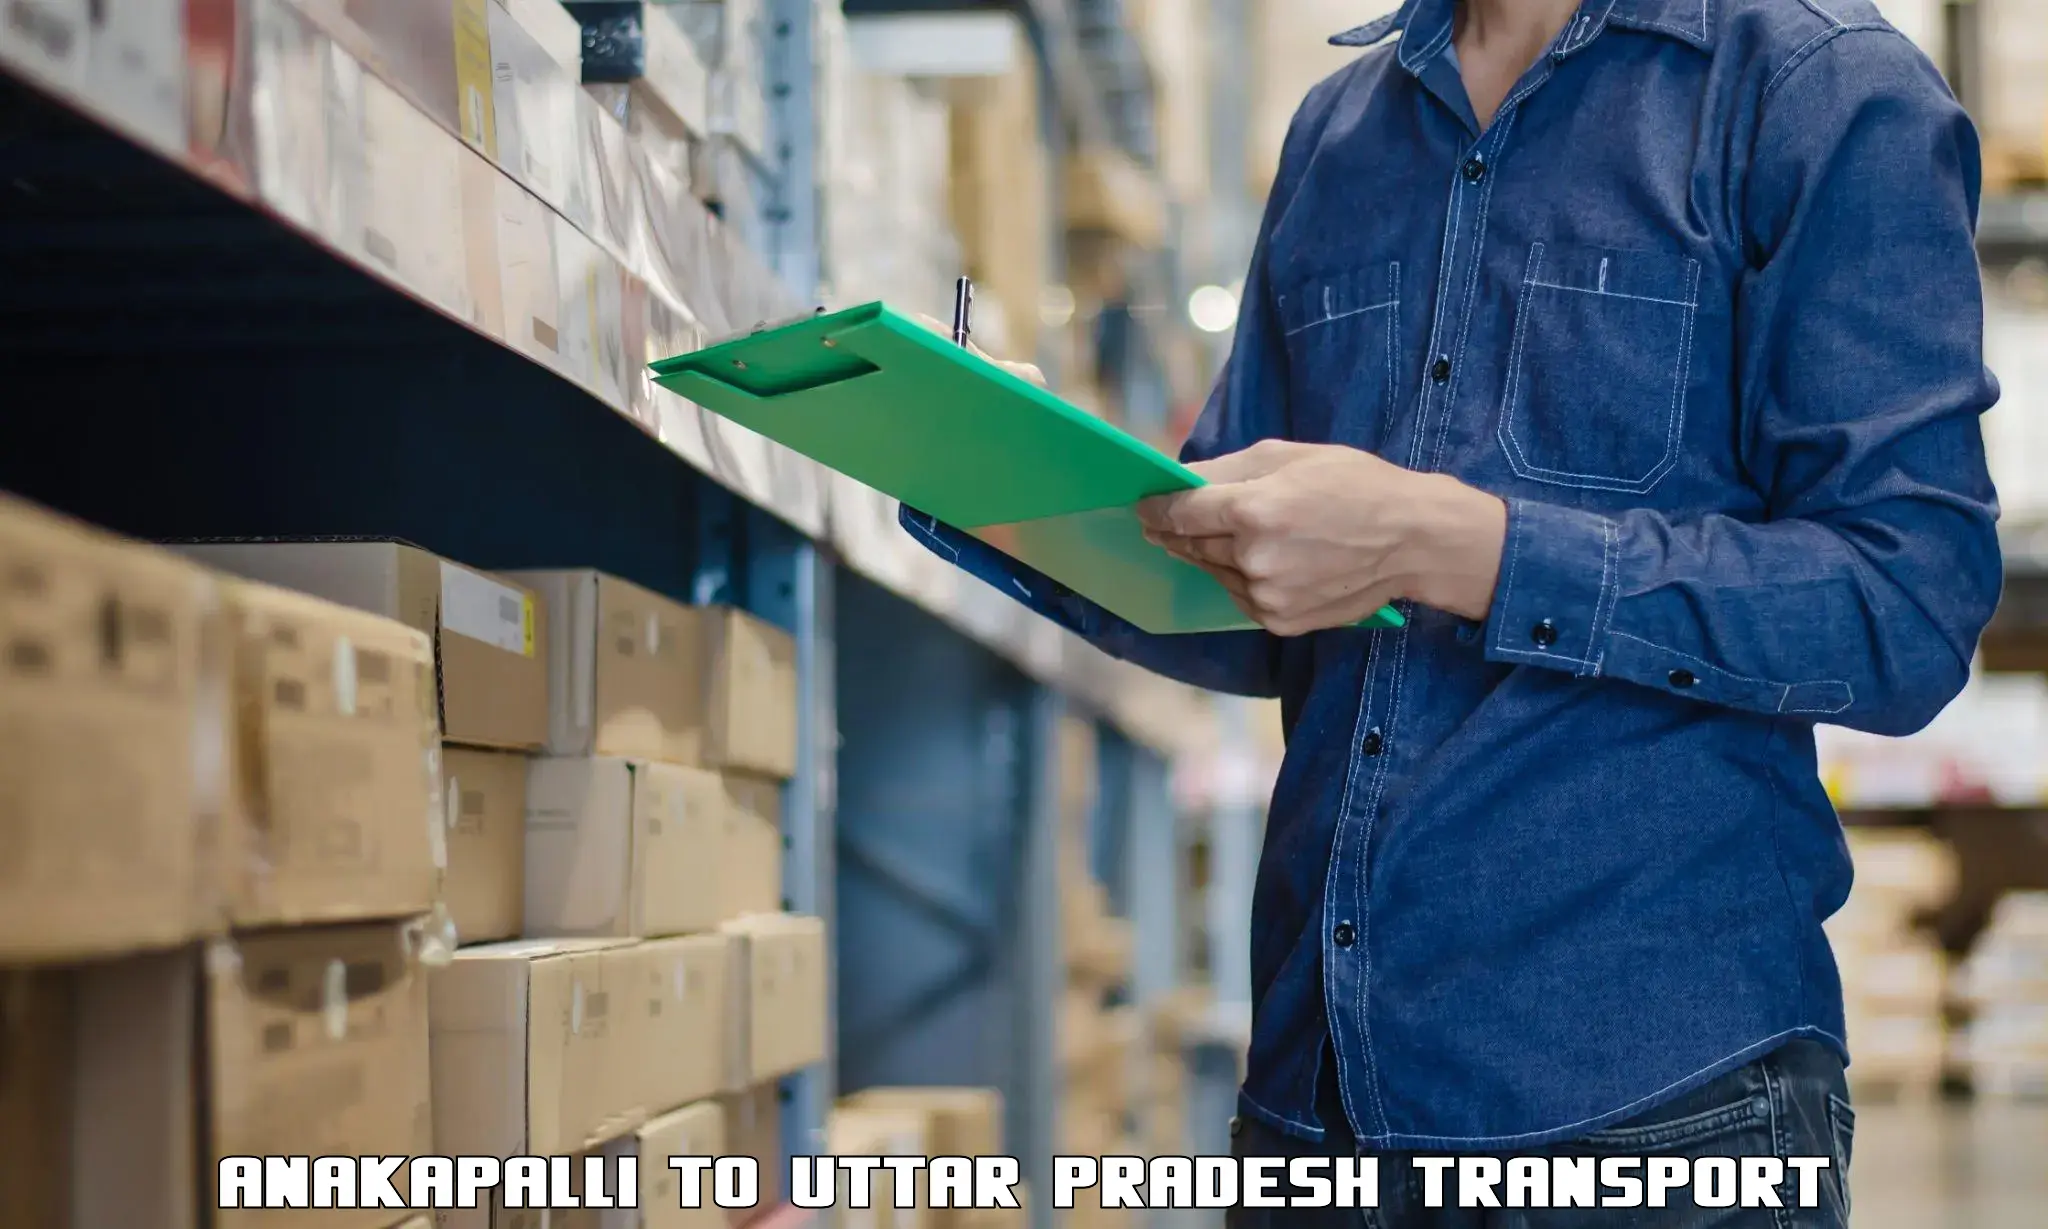 Container transport service Anakapalli to Ghaziabad